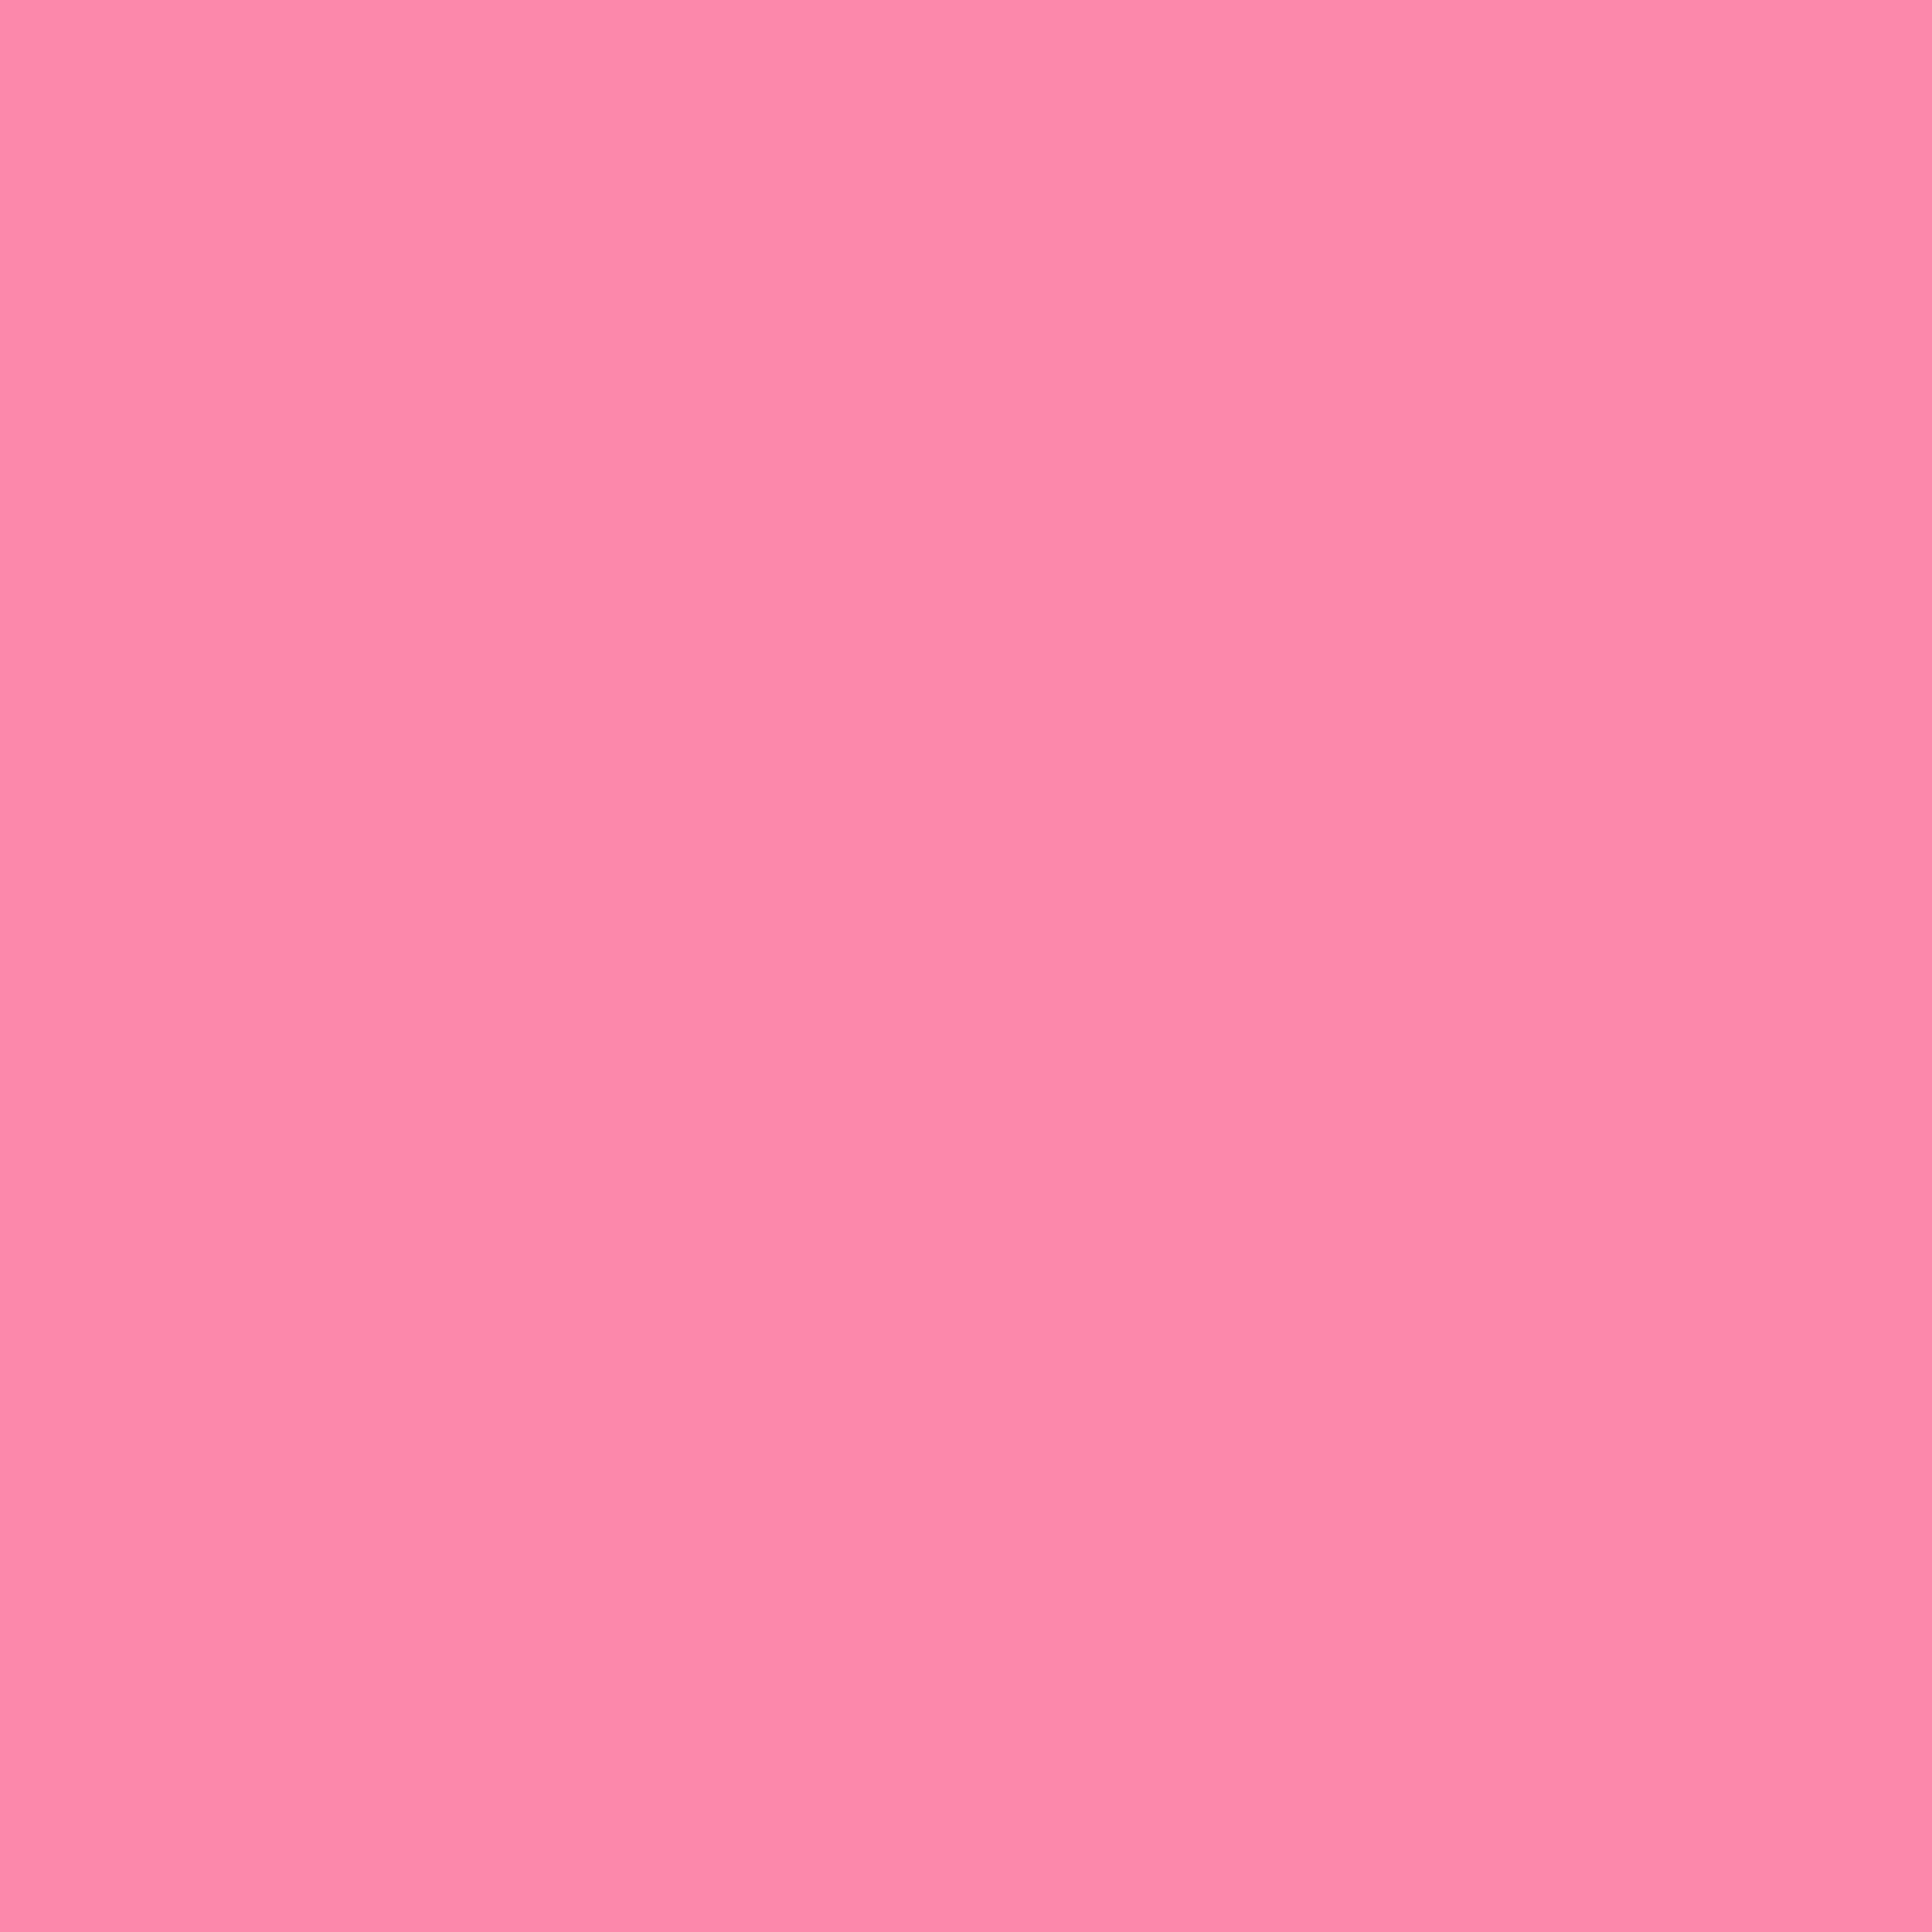 3600x3600 Tickle Me Pink Solid Color Background